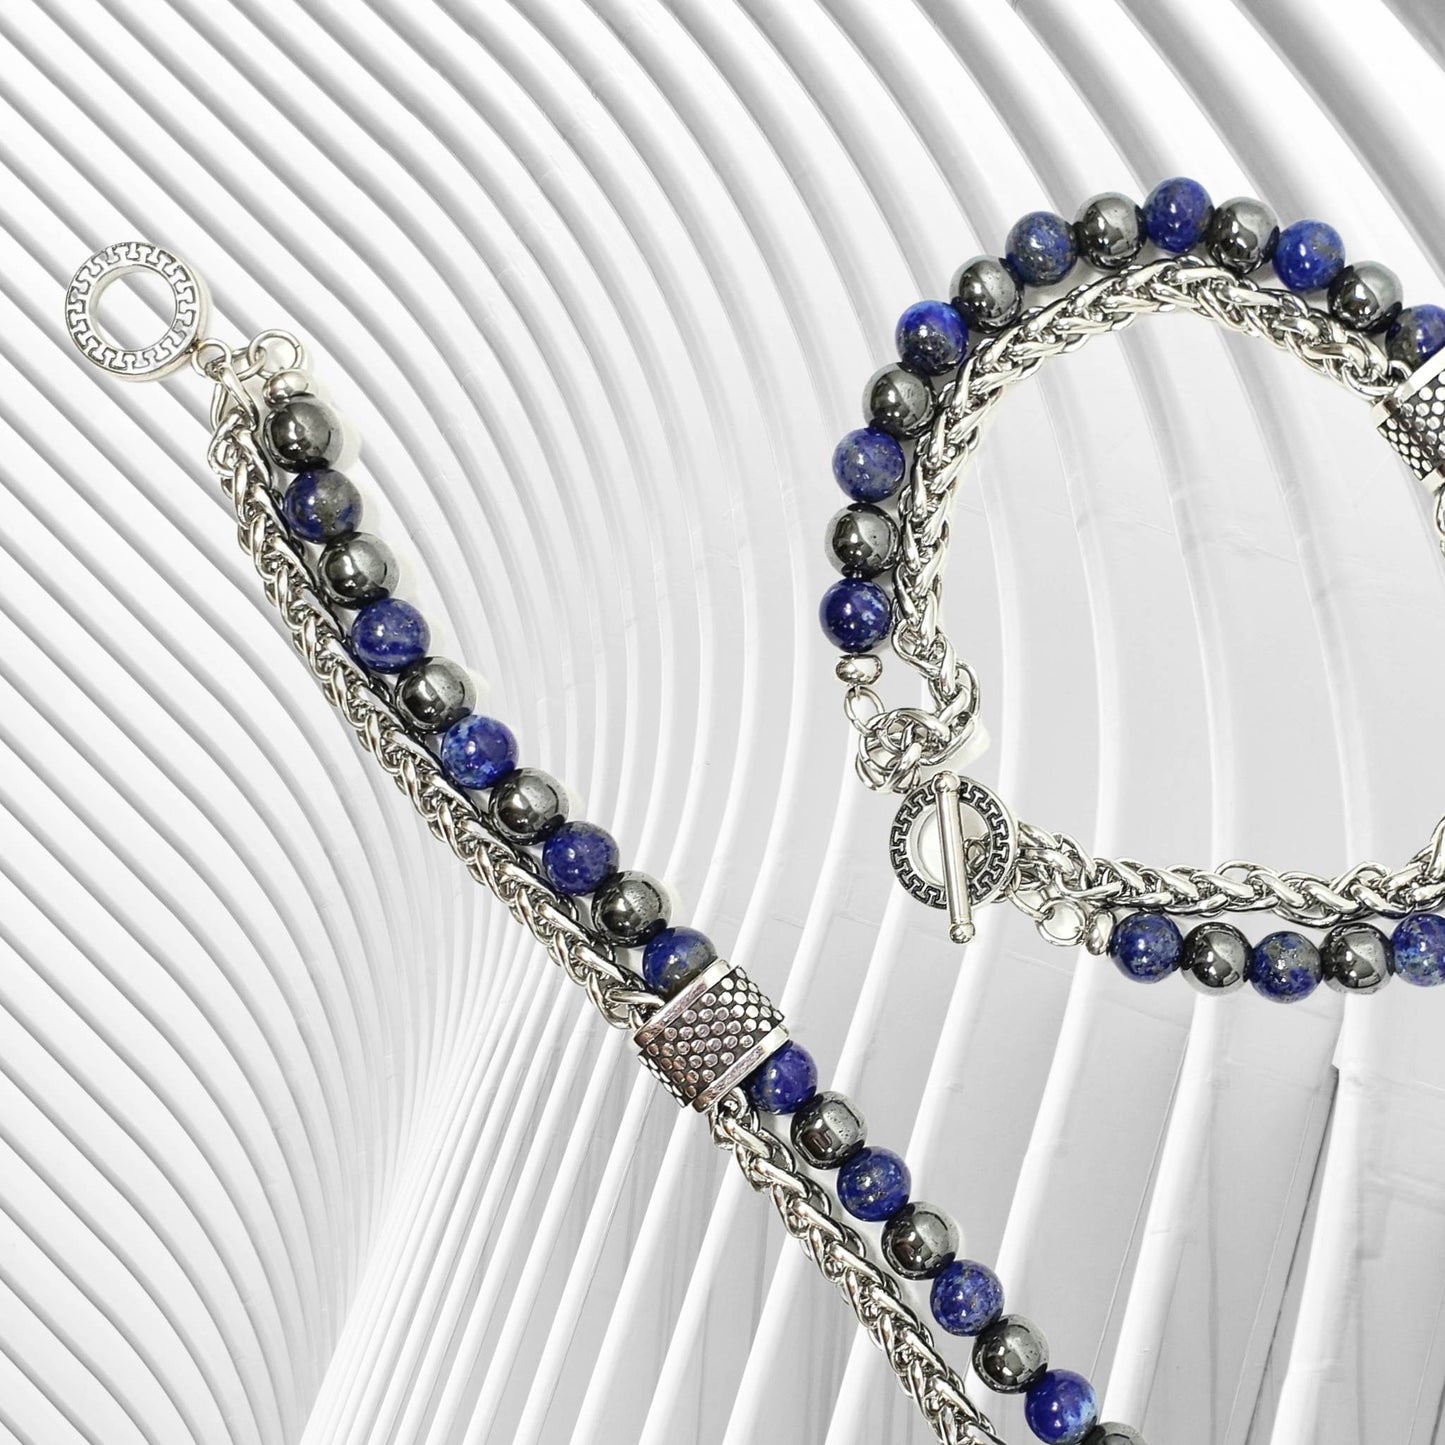 Hematite and Lapis Lazuli Bracelet with Chain and Clasp